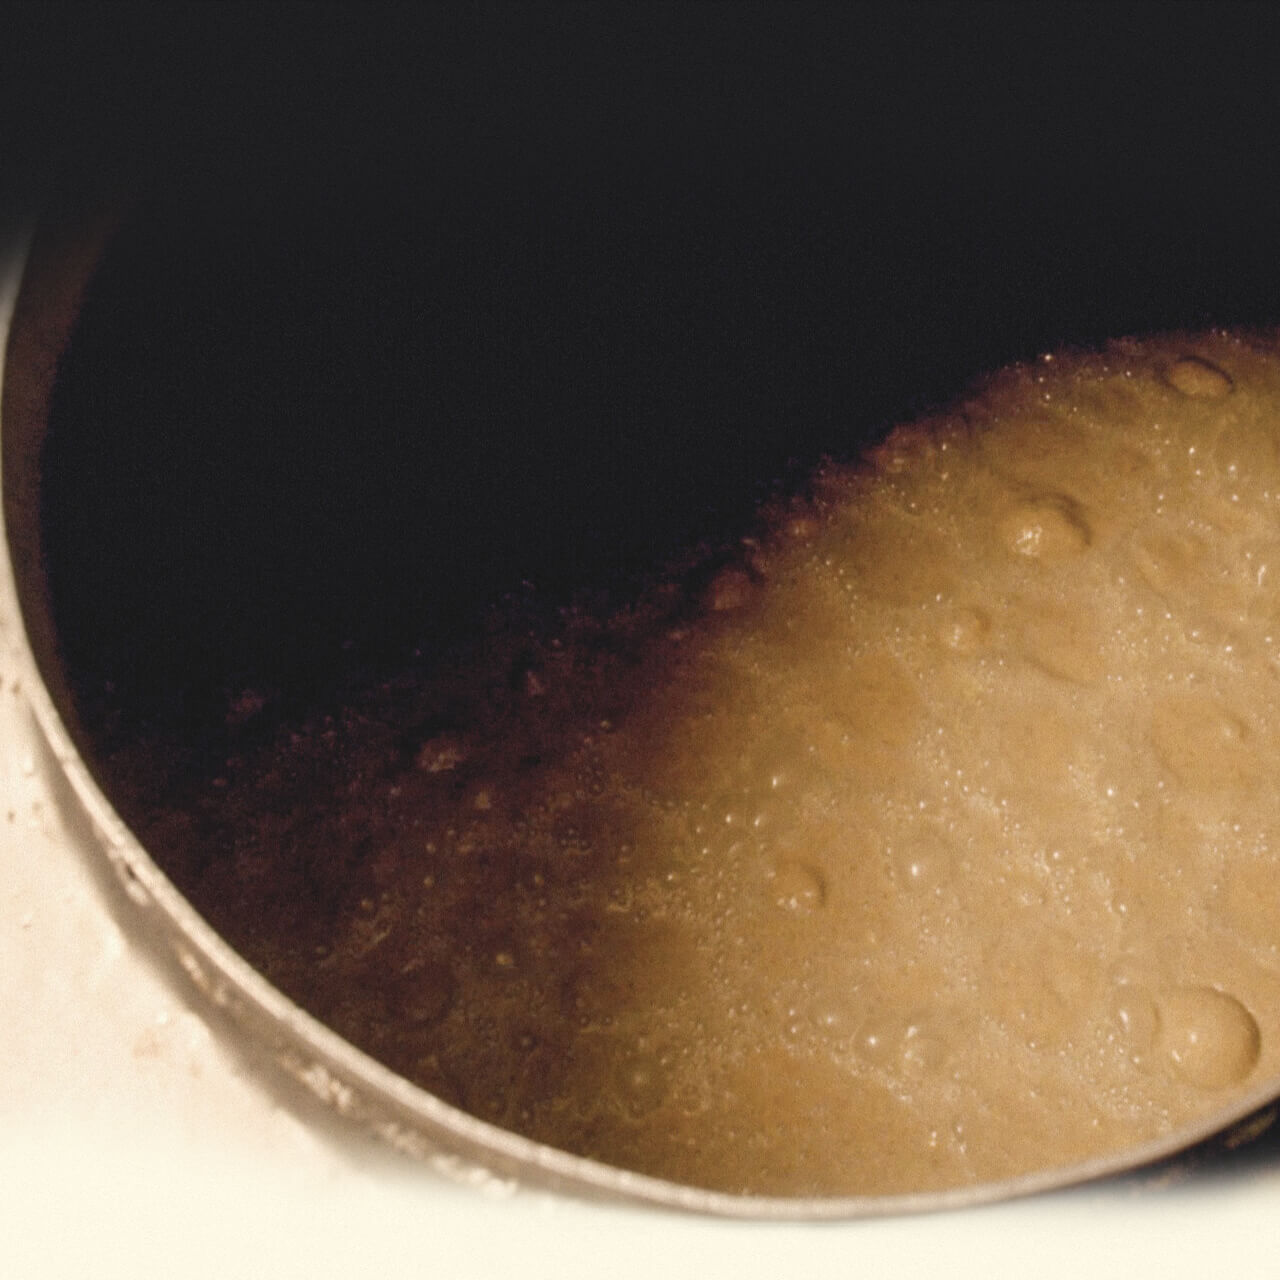 Barrel with yeast for the Jim Beam bourbon making process.